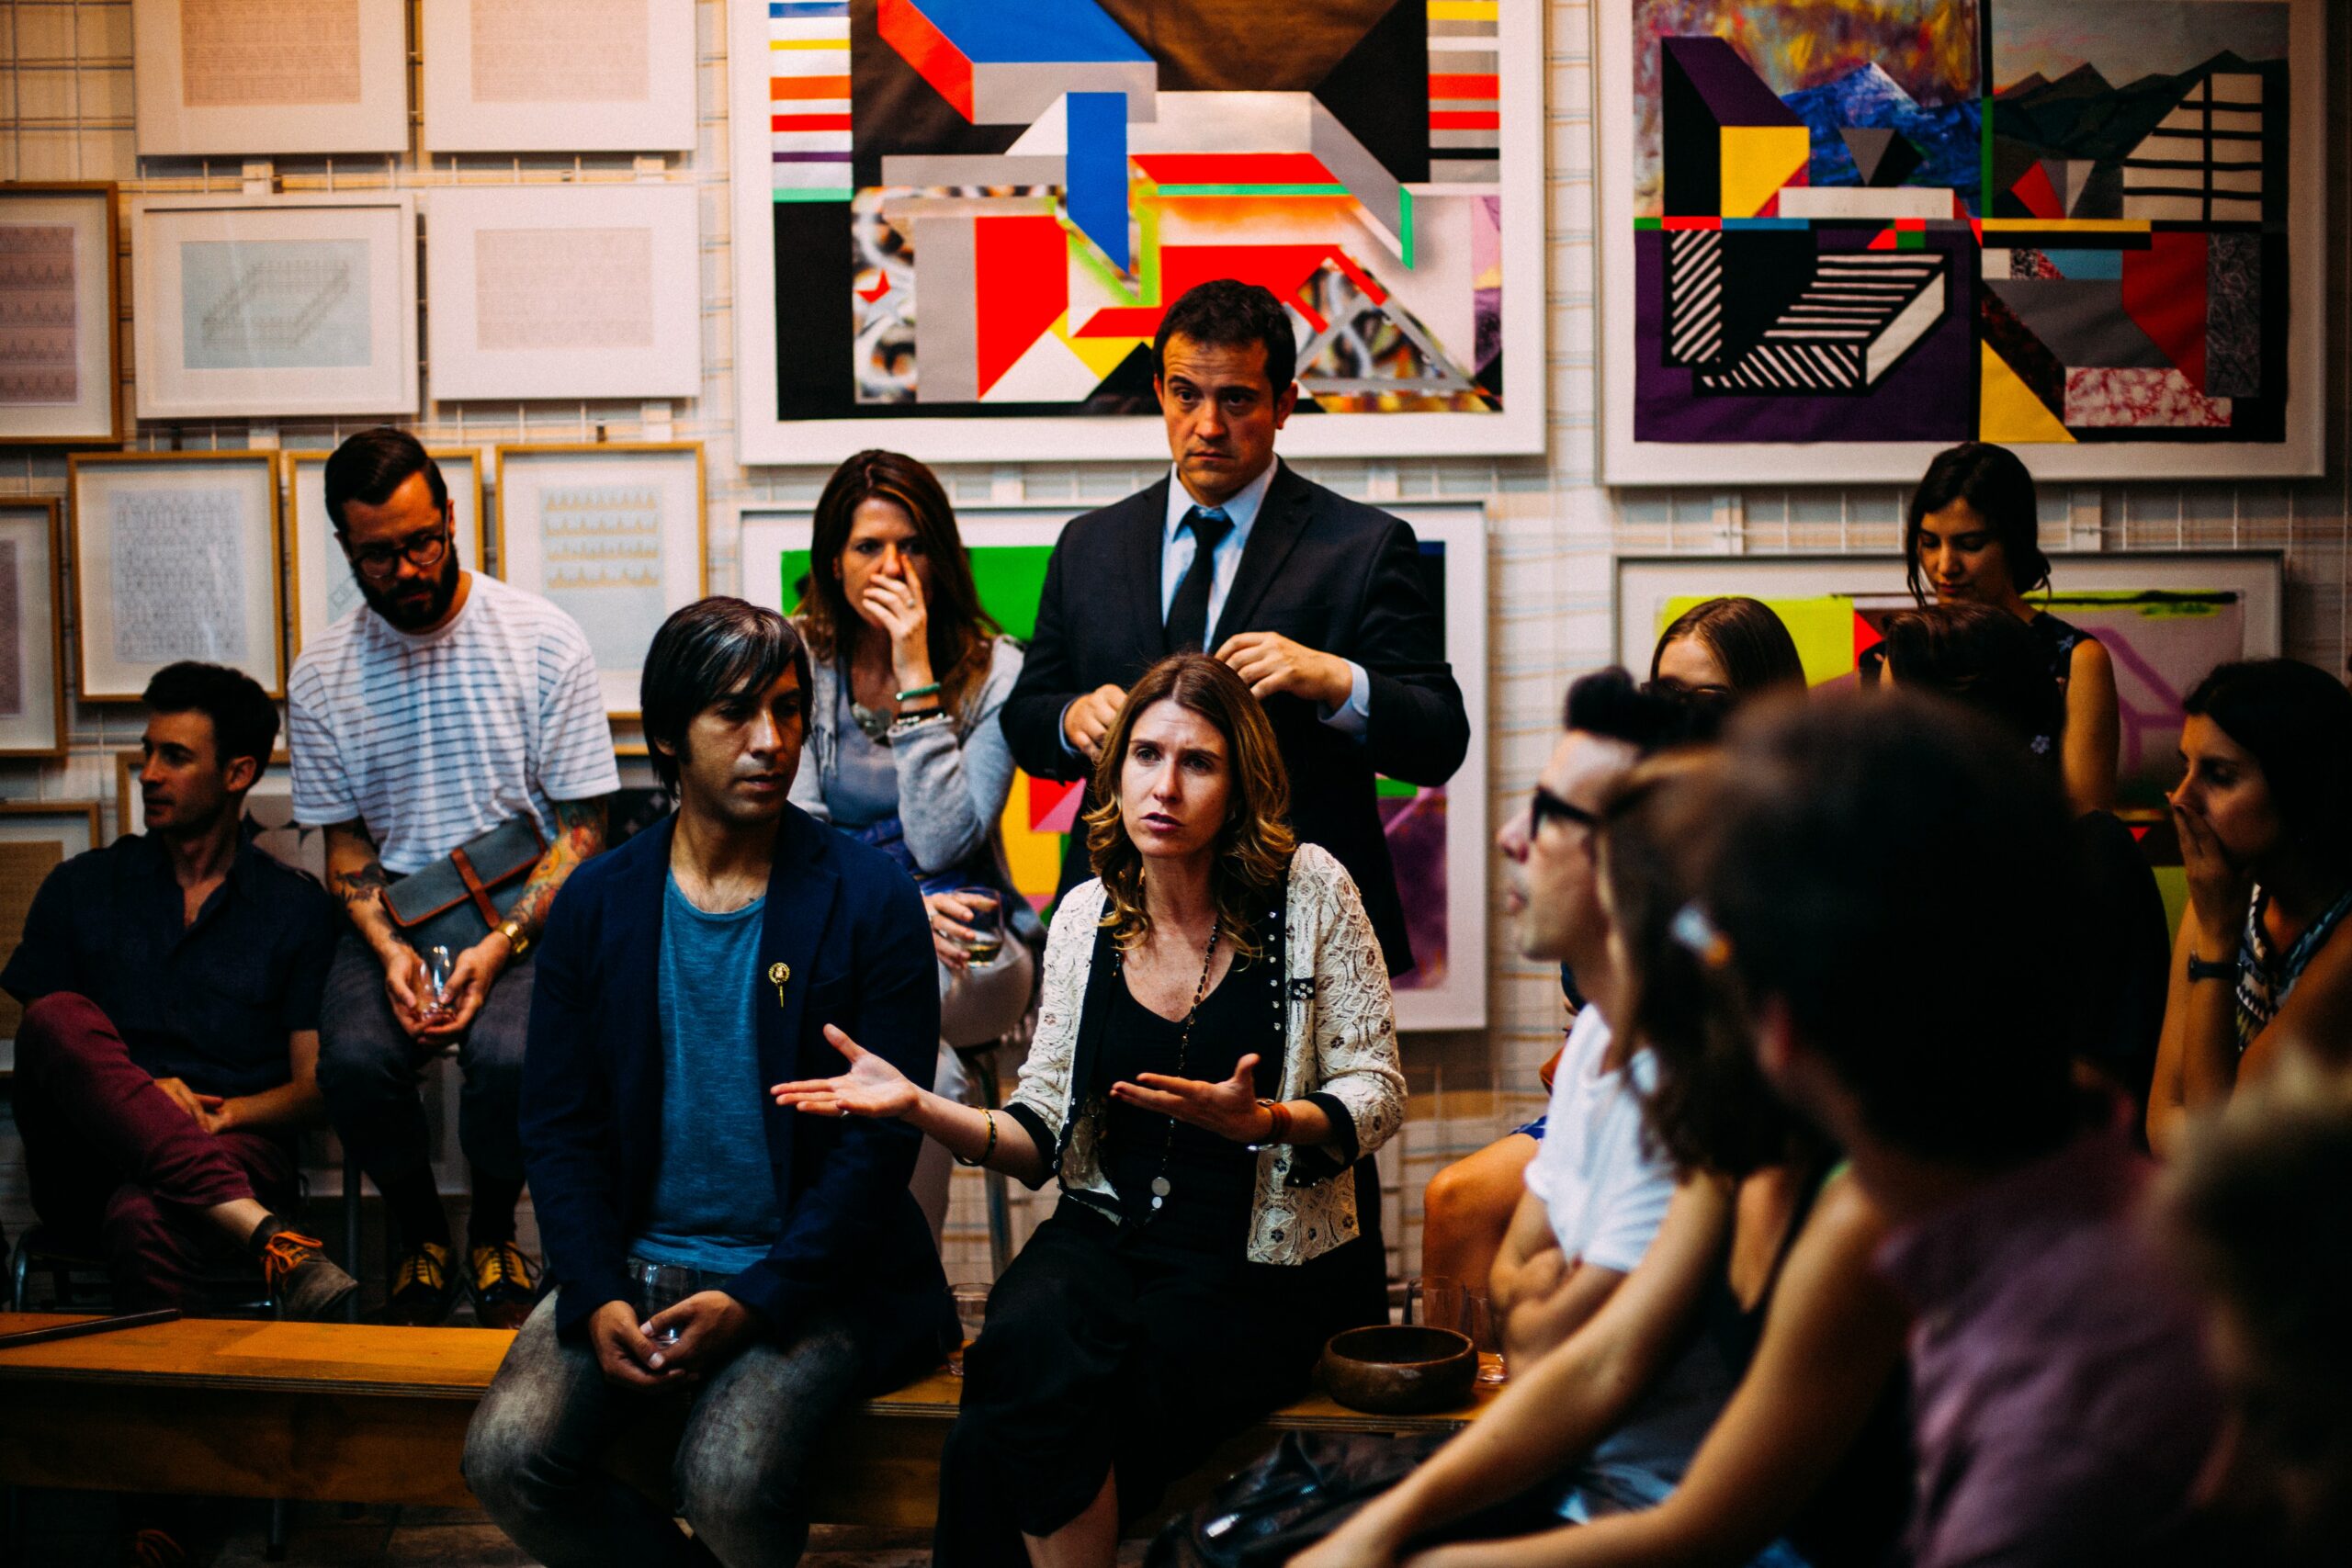 A group of people participating in a discussion